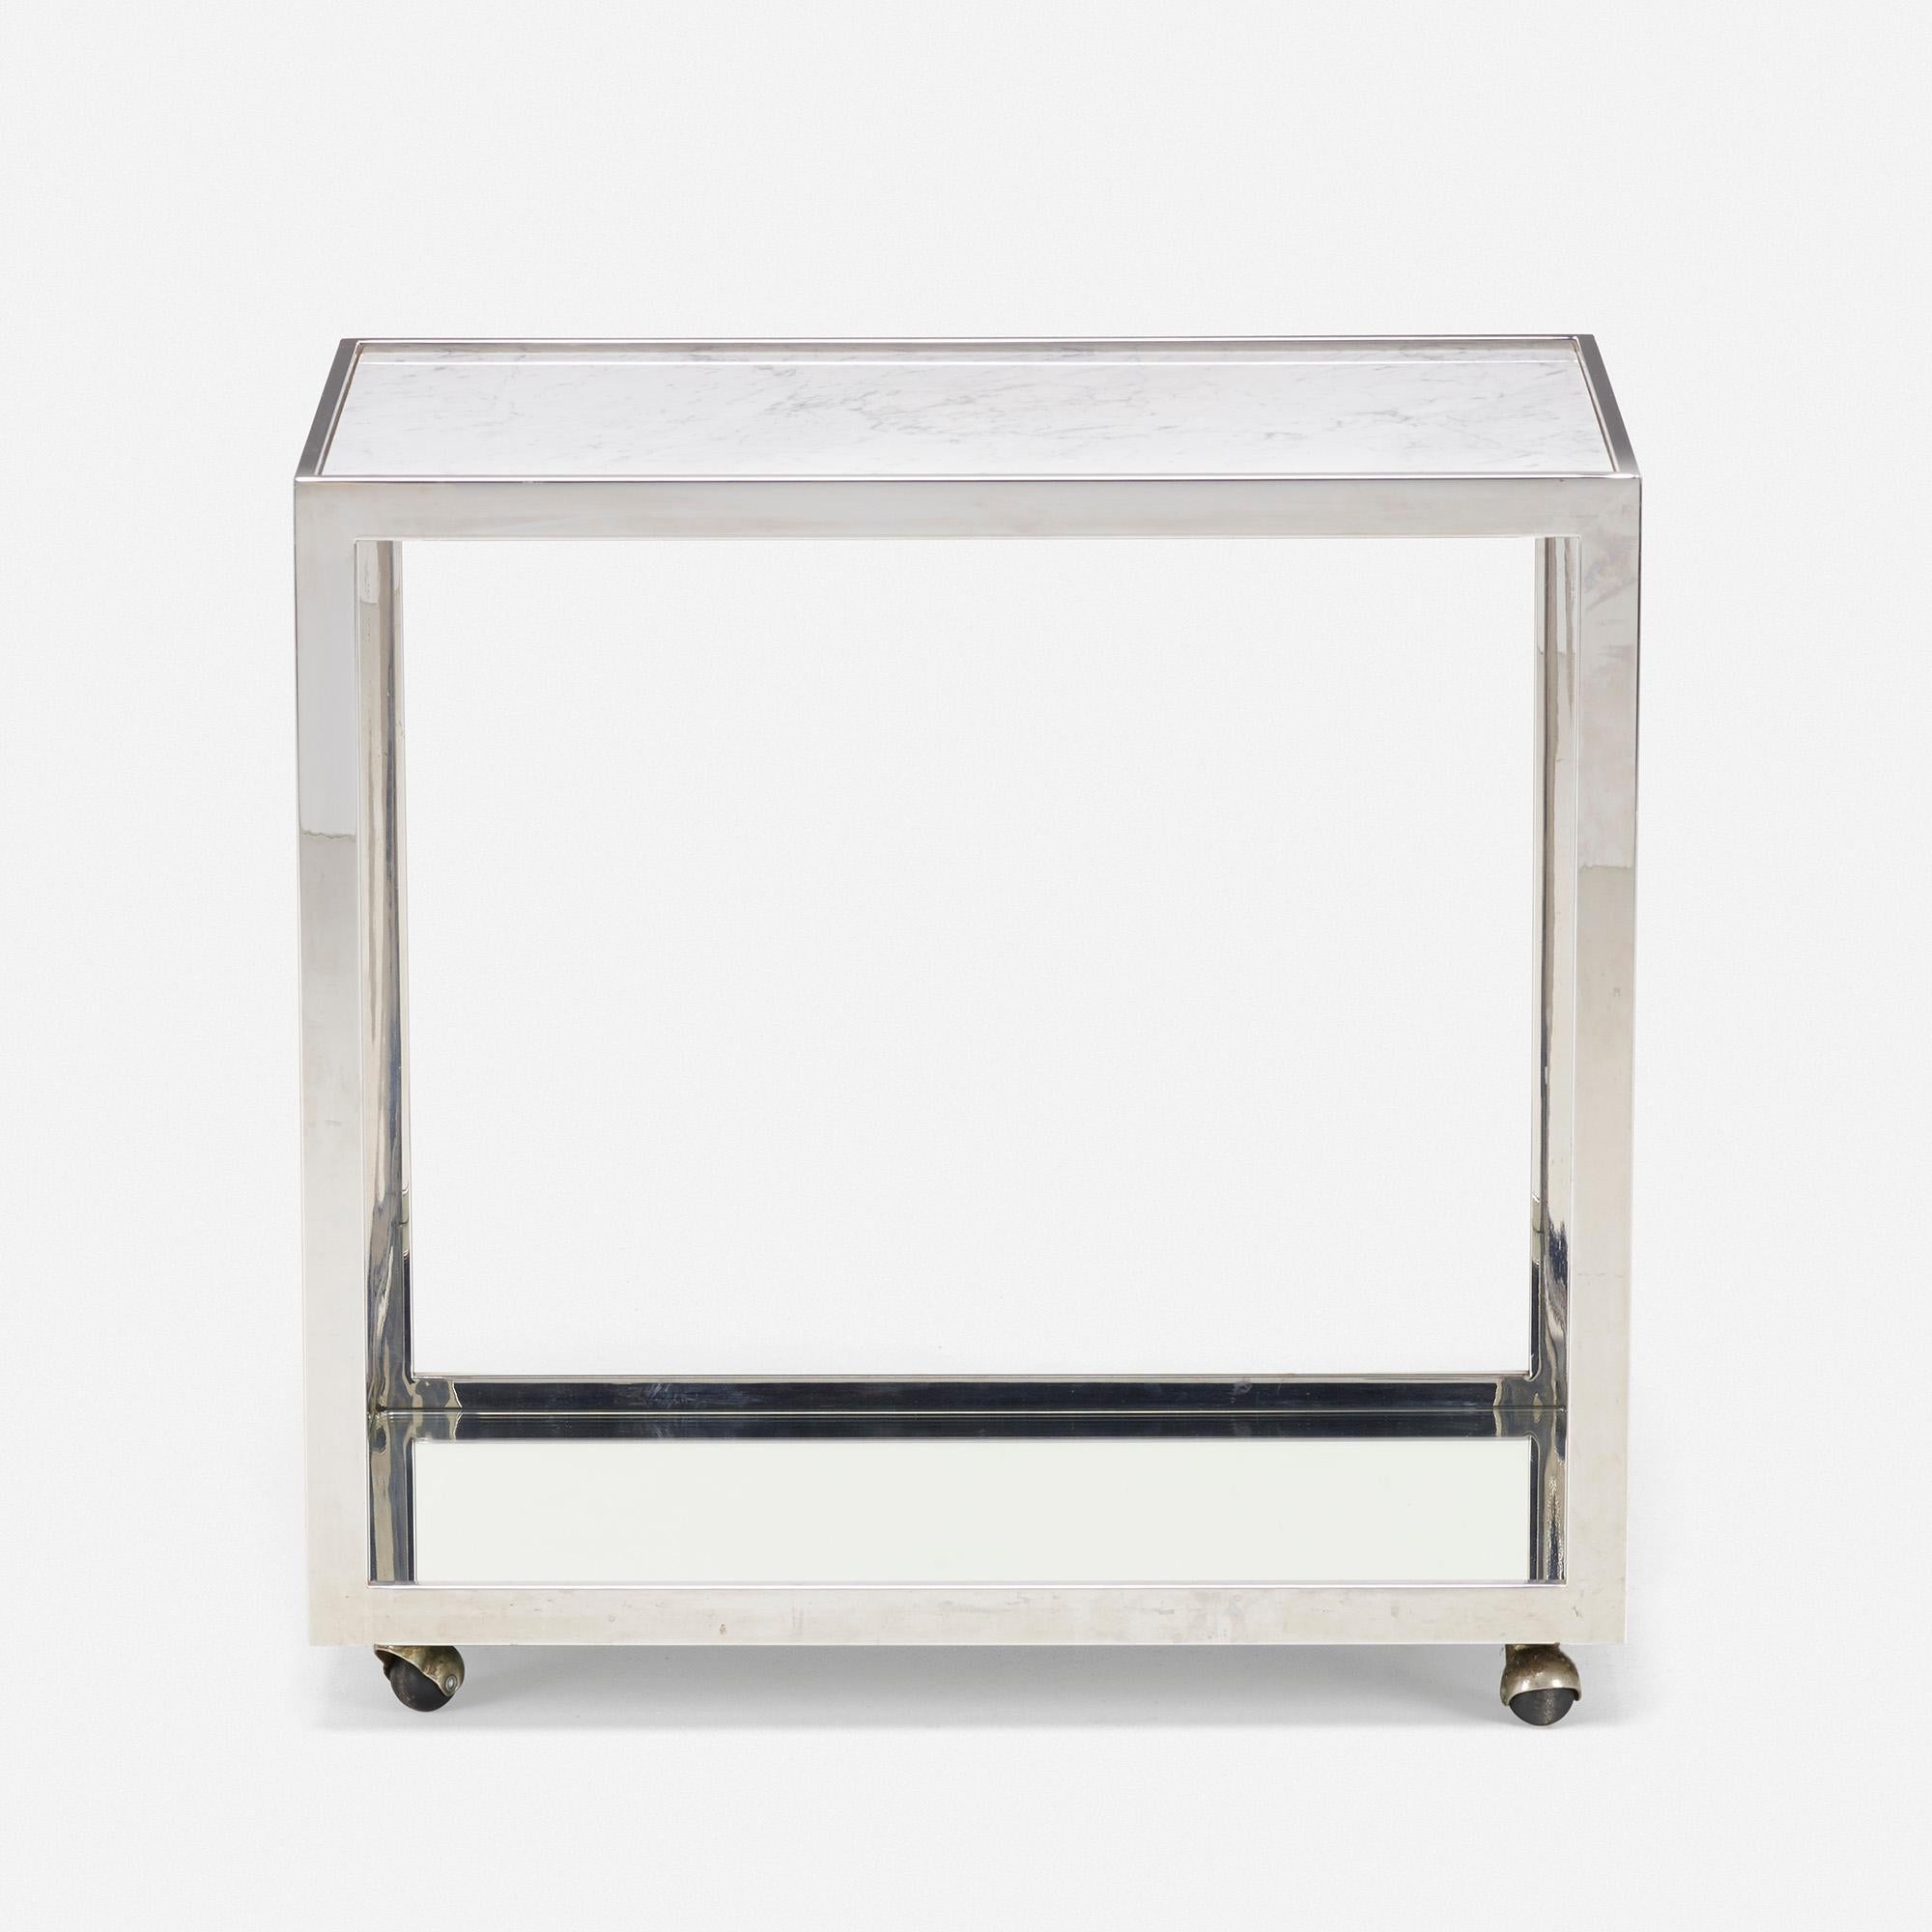 Made in: USA, c. 1970

Material: chrome-plated steel, mirrored glass, marble

Size: 31 W × 19 D × 30.25 H in.